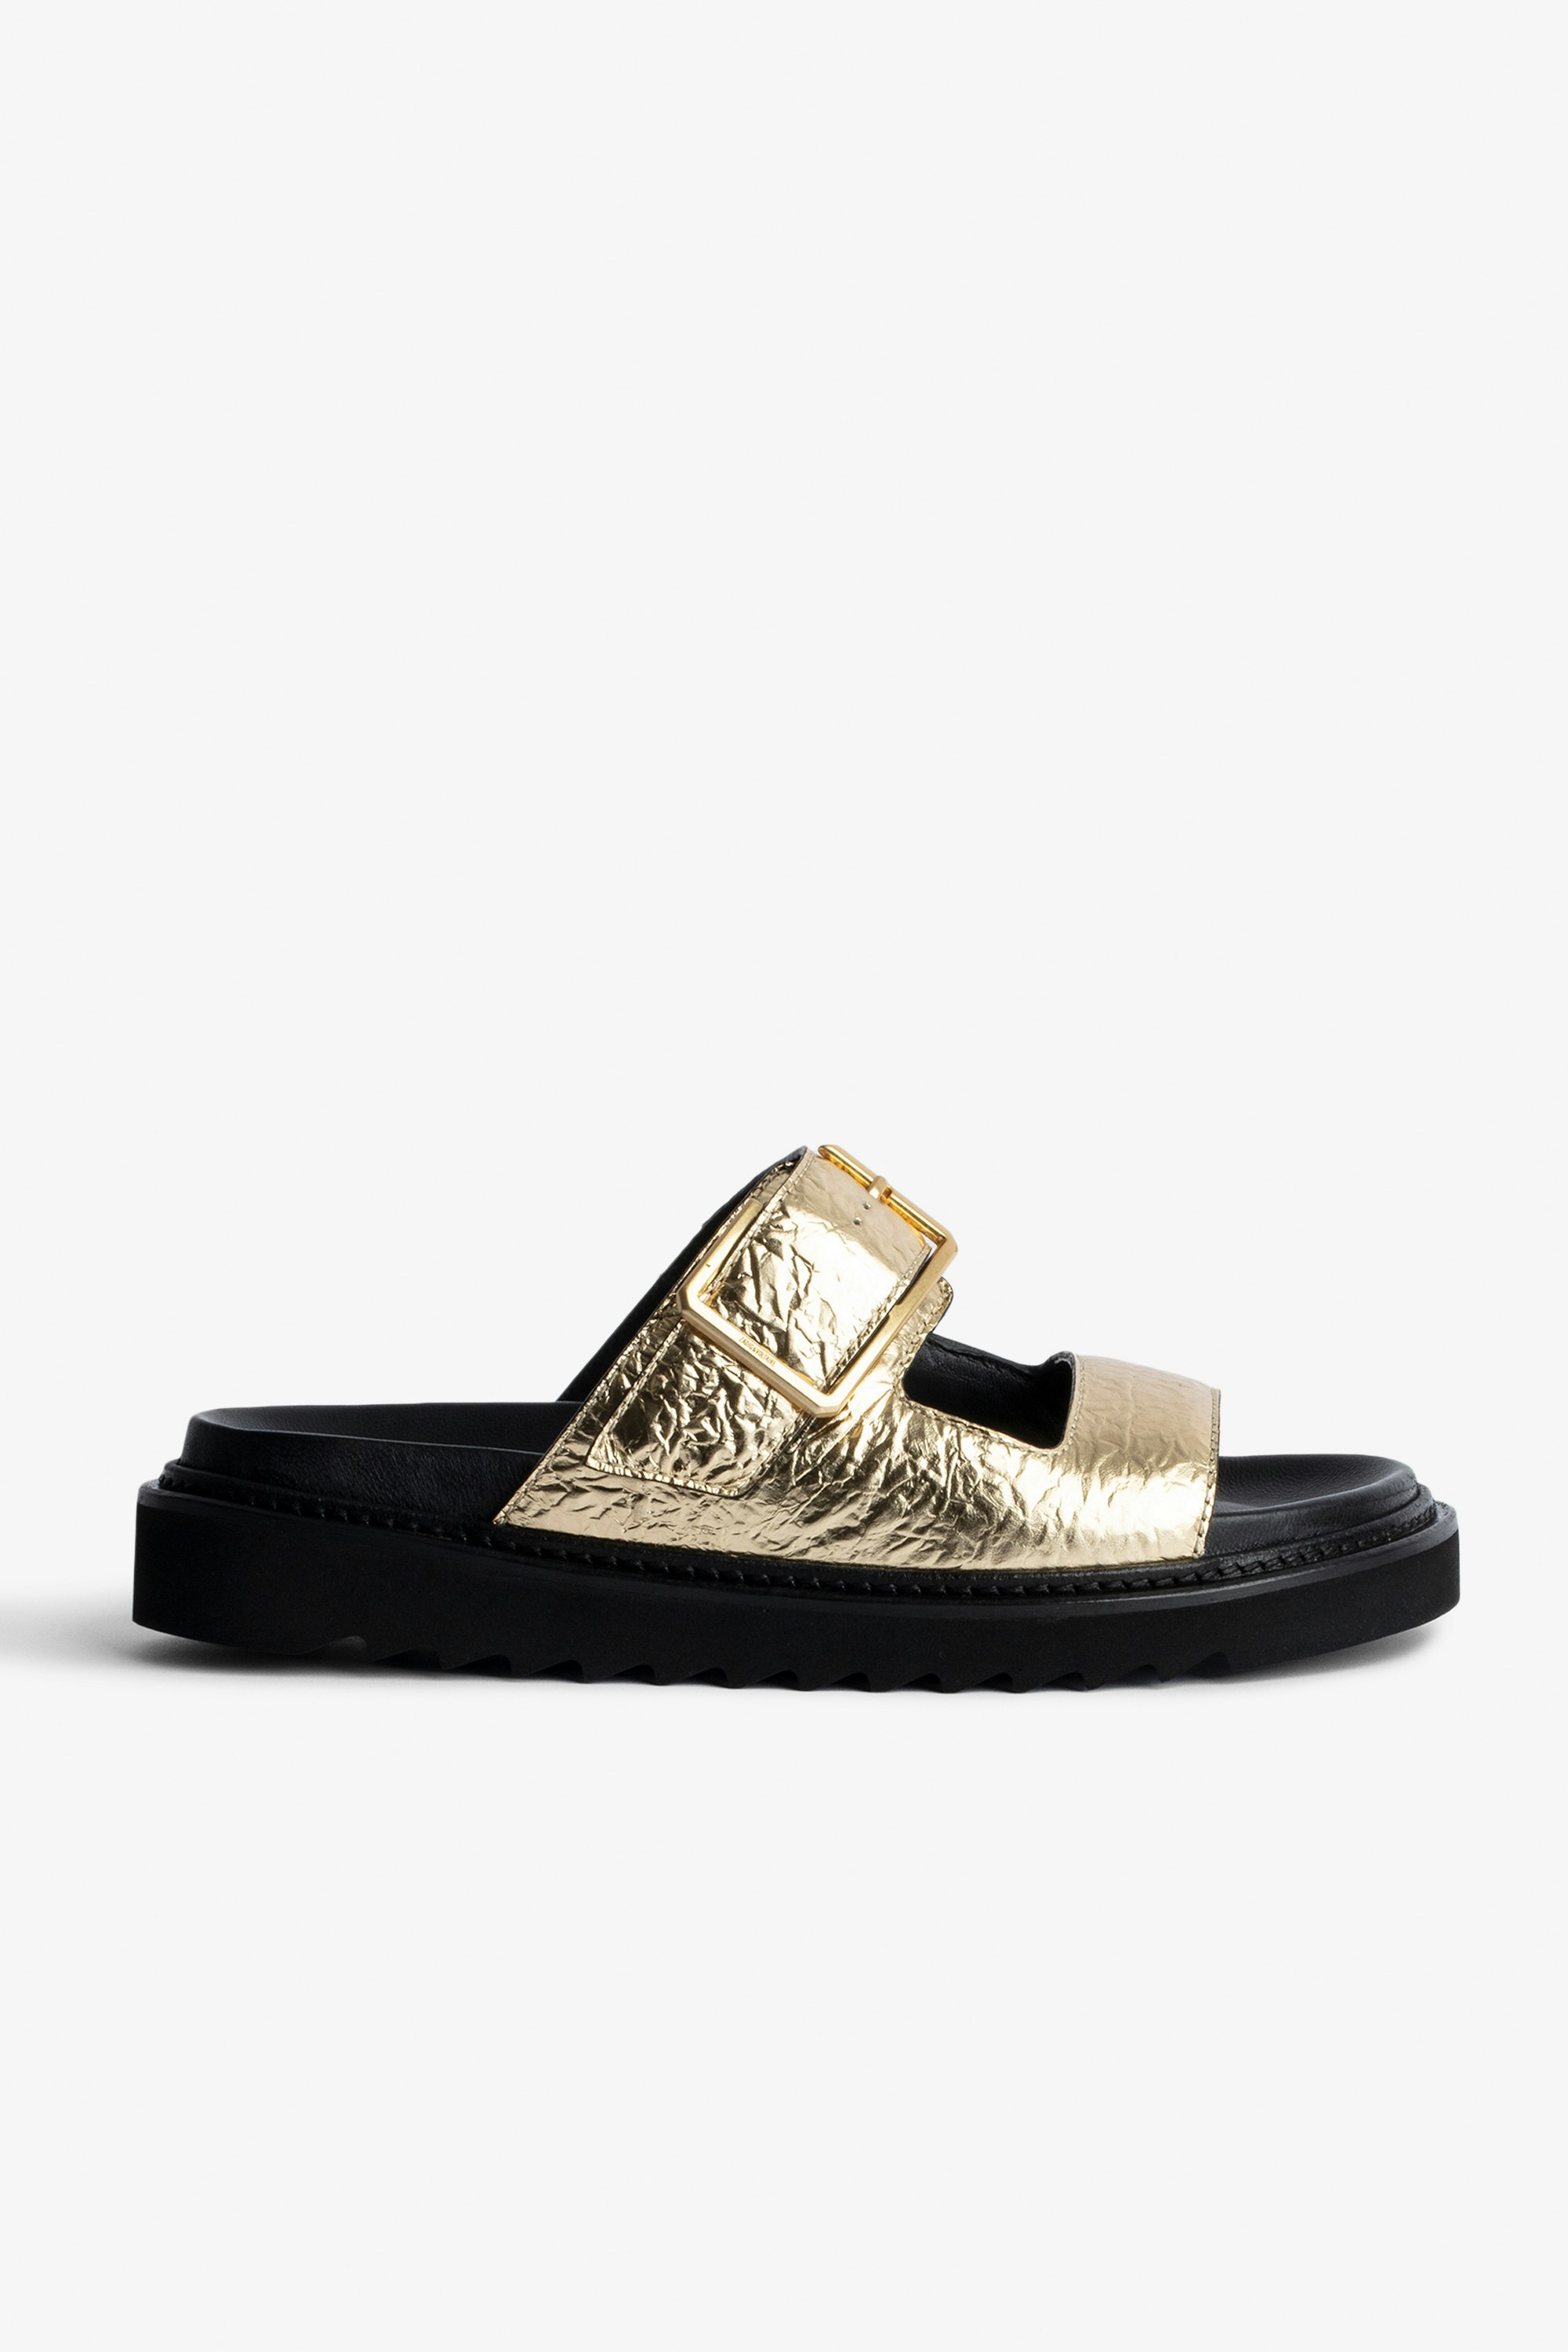 Cecilia Alpha Sandals Women's sandals in metallic, crinkled leather with strap and C-shaped buckle